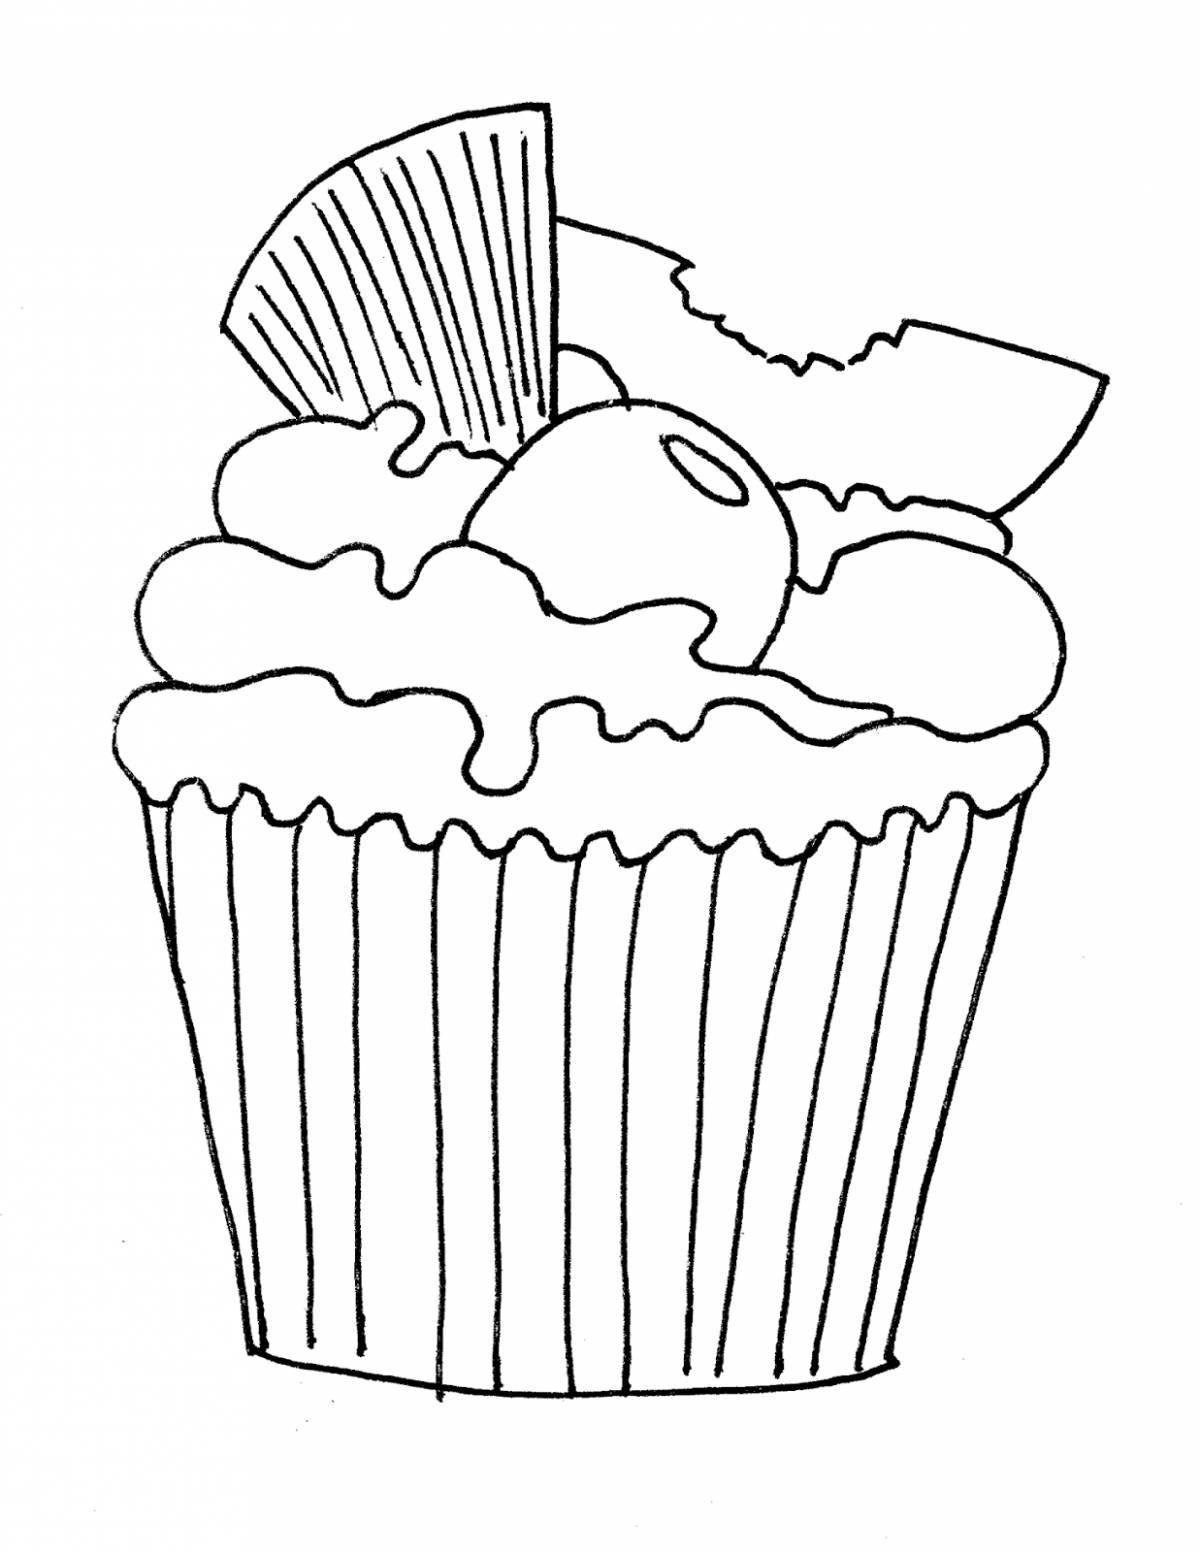 Fruit Pie Coloring Page